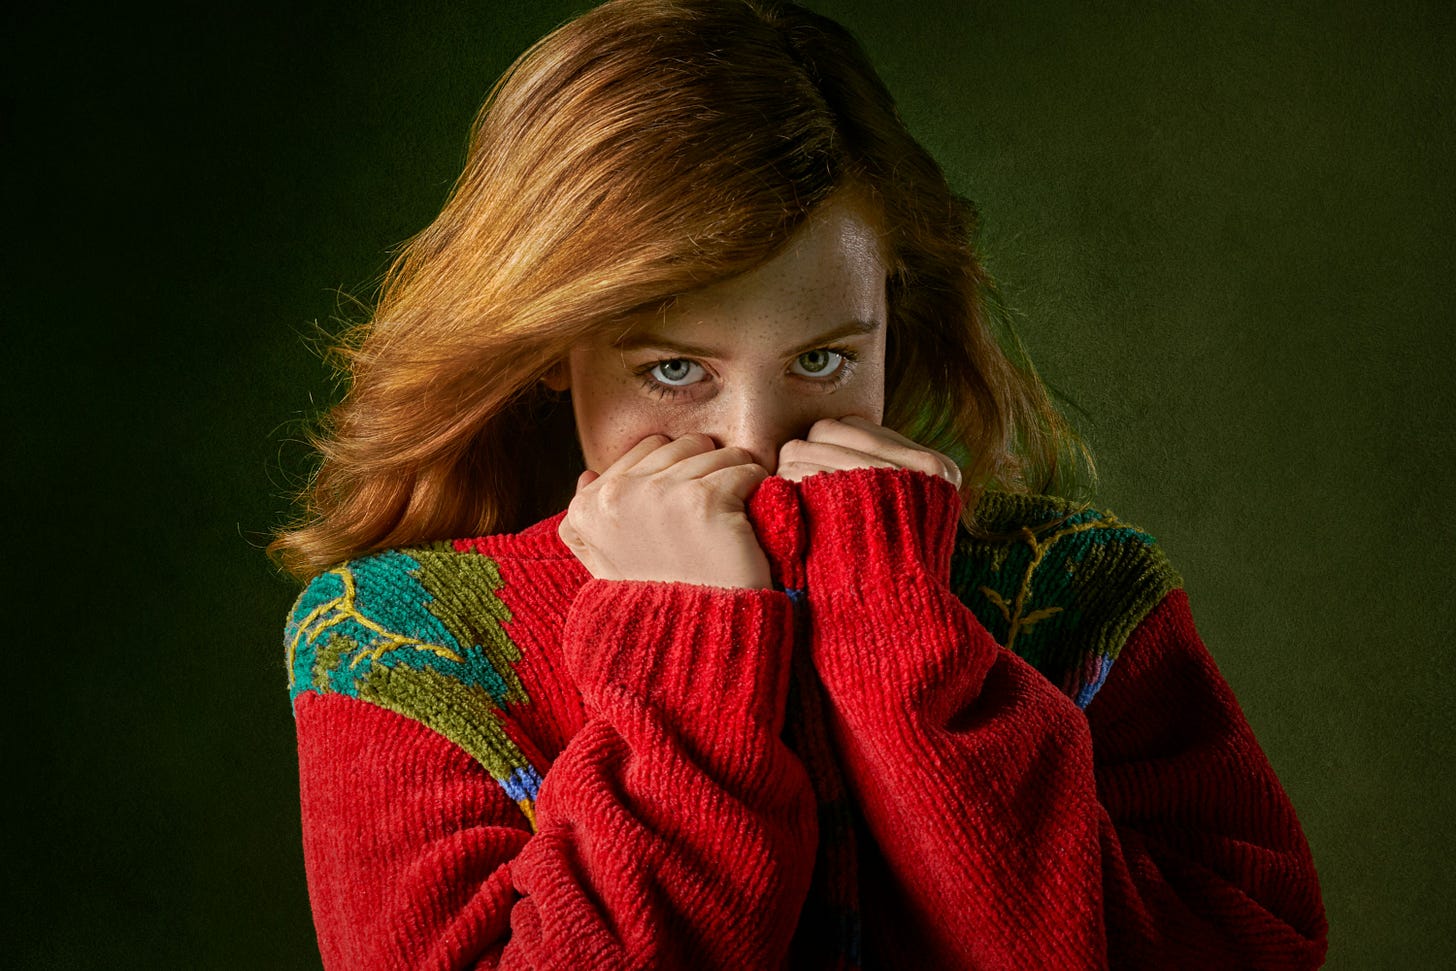 A shy redhead pulls the neck of her red sweater over her mouth